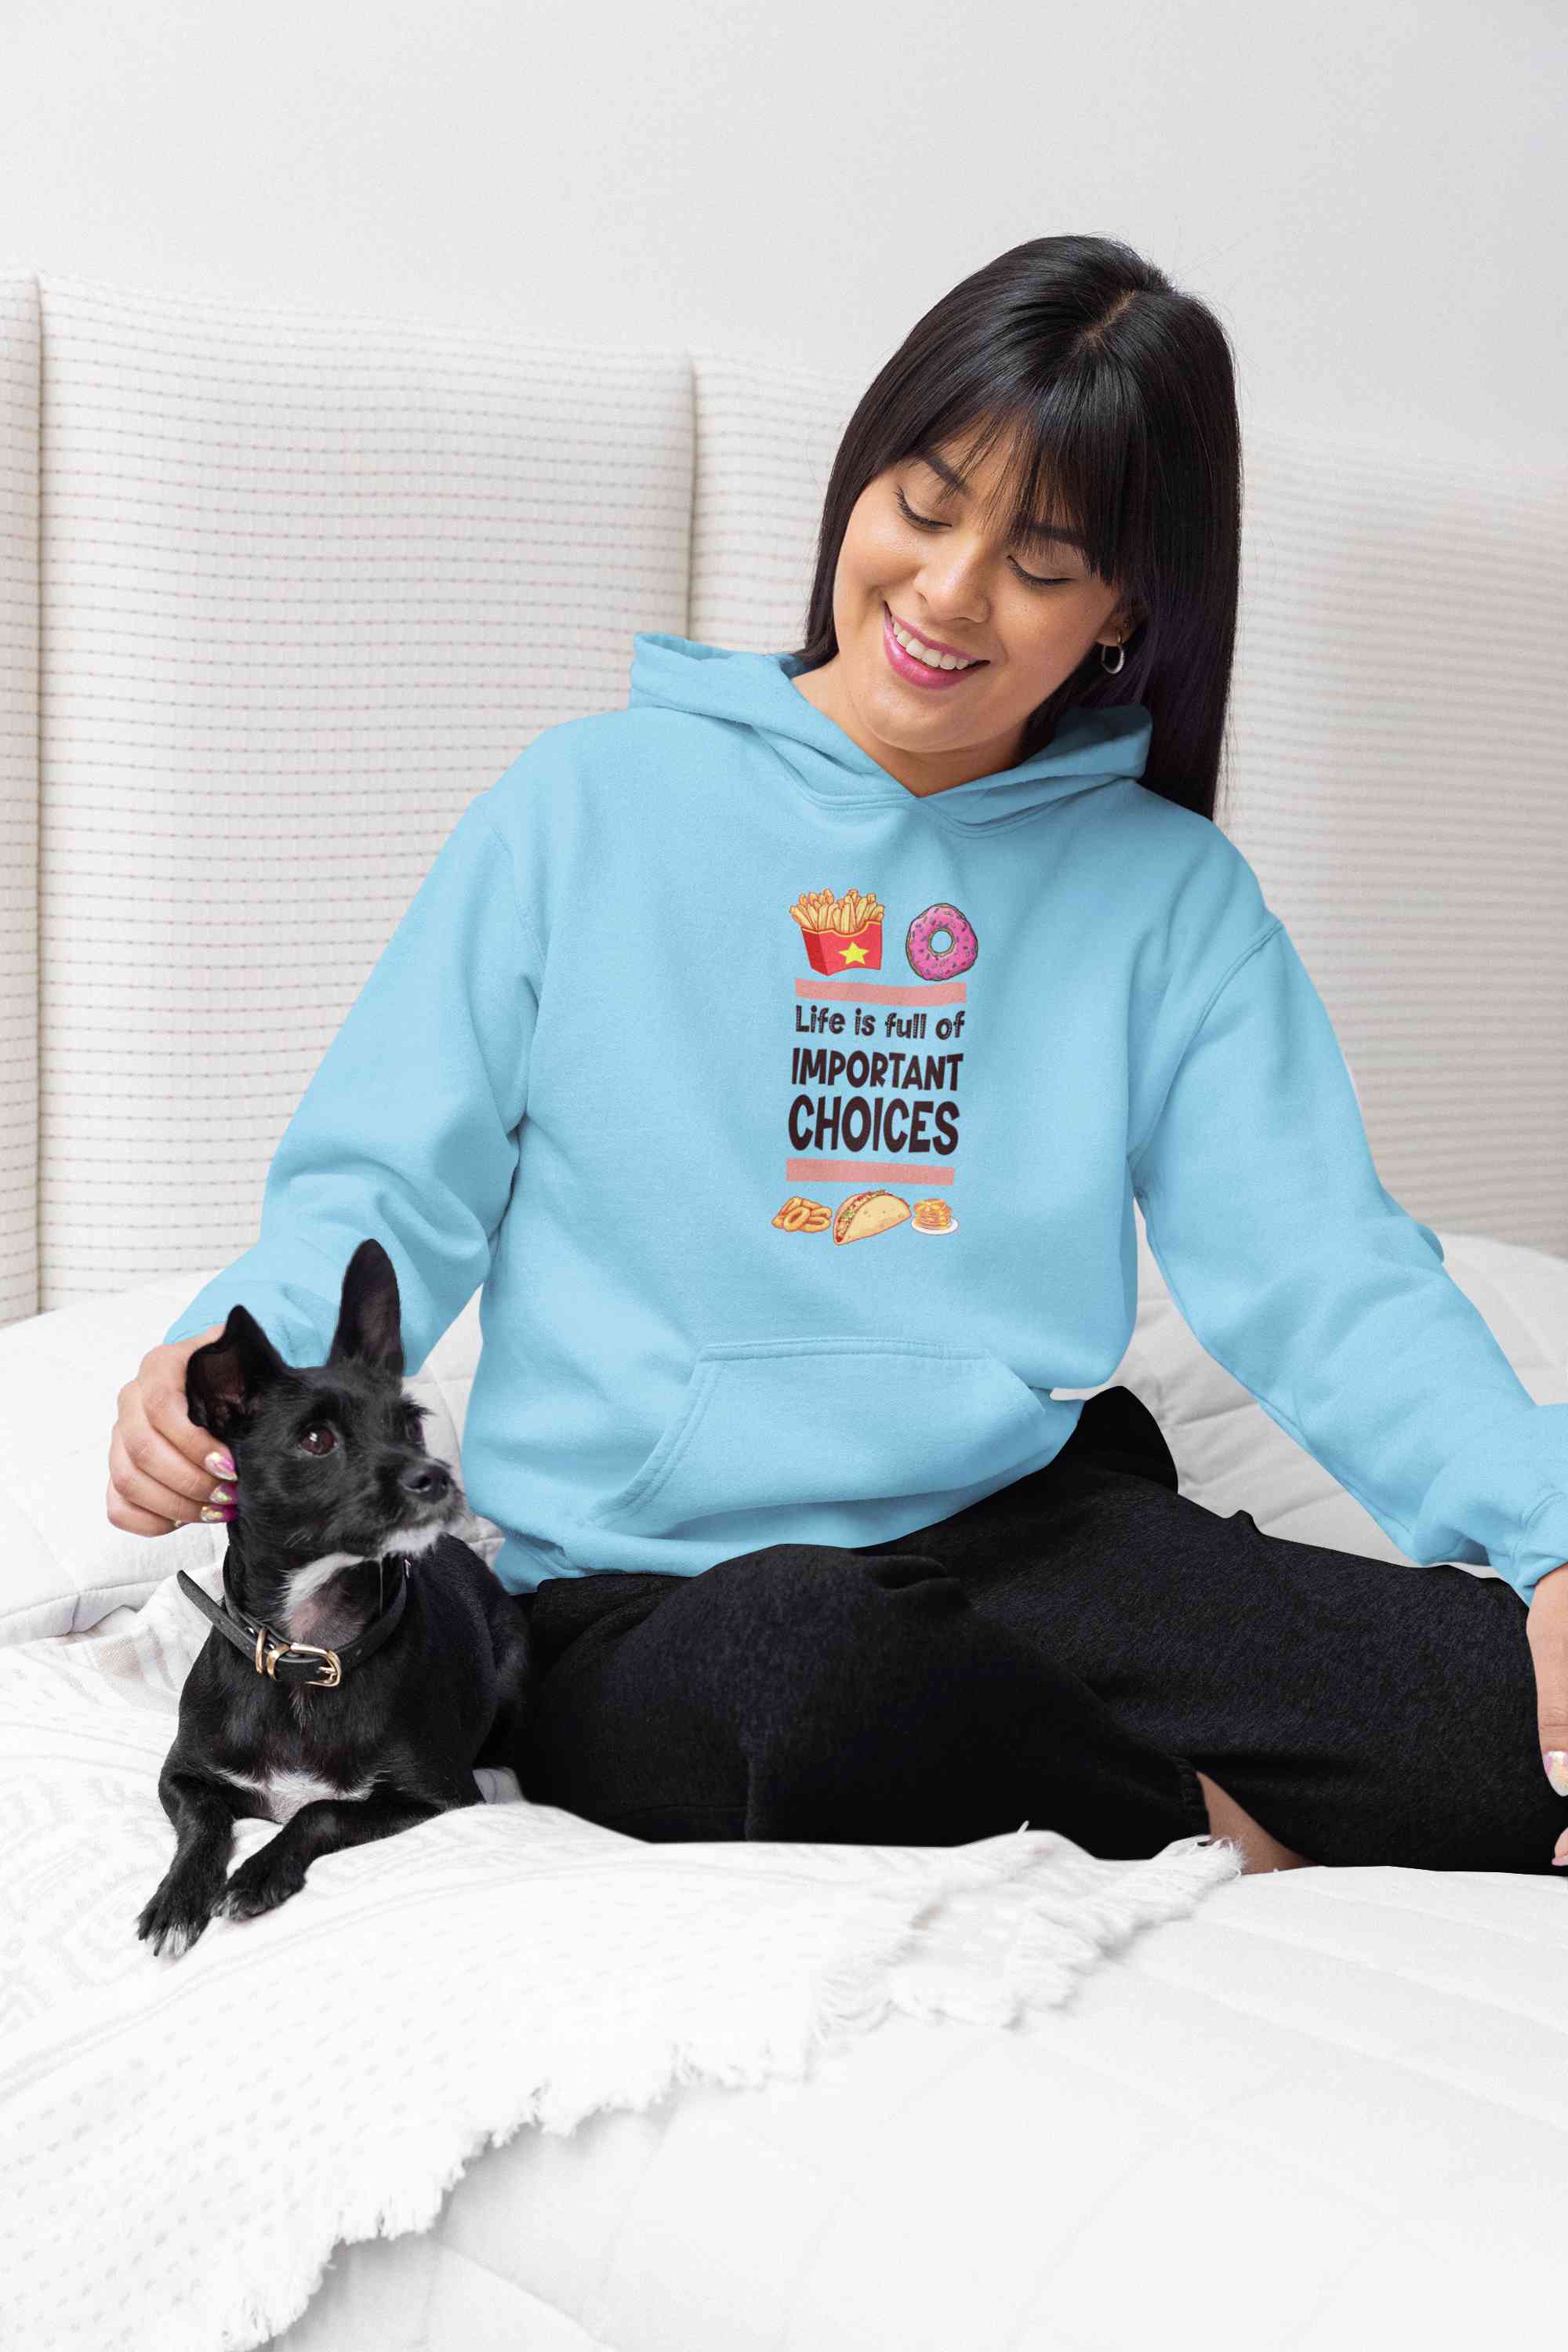 Sweet Choices Quotes Hoodies for Women-FunkyTeesClub